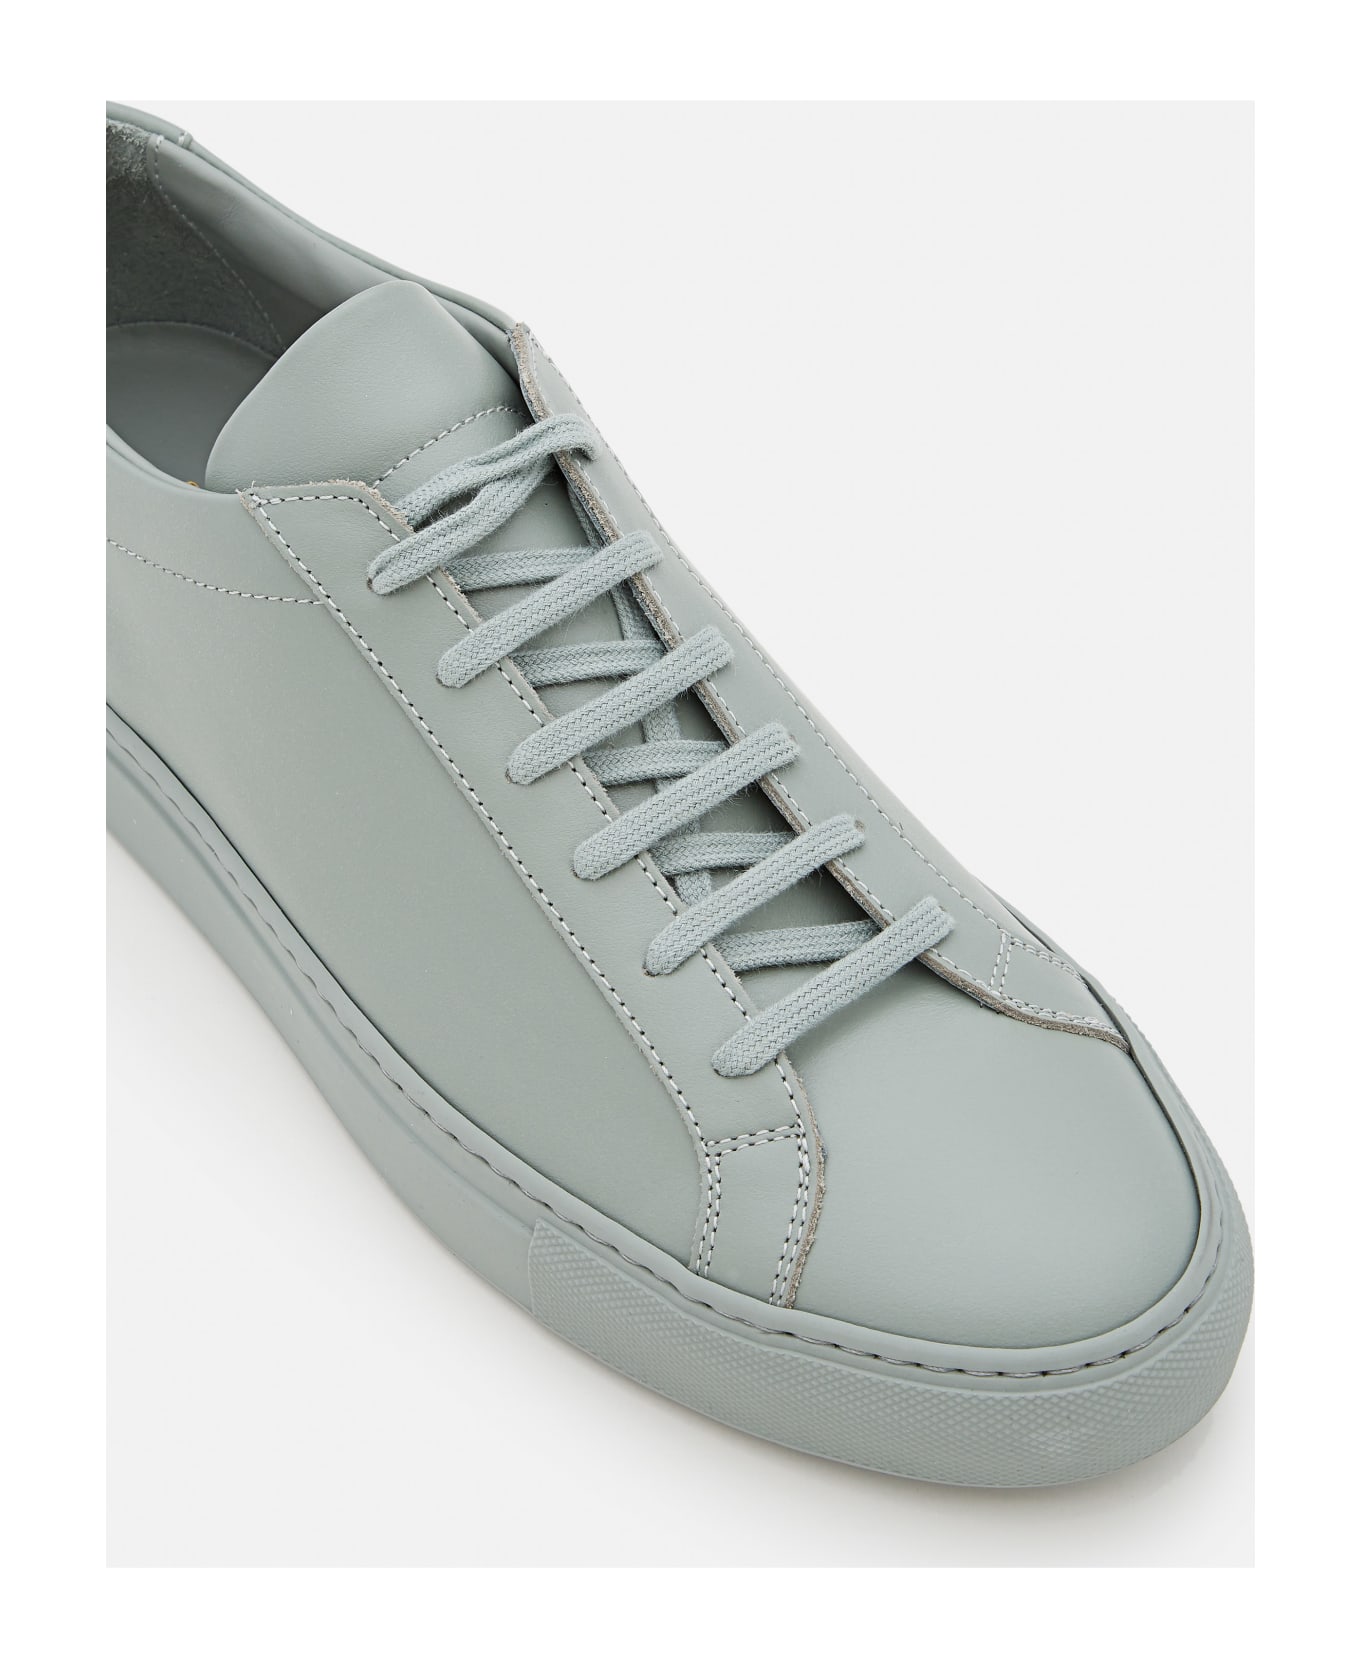 Common Projects Original Achilles Low Sneakers - Green スニーカー